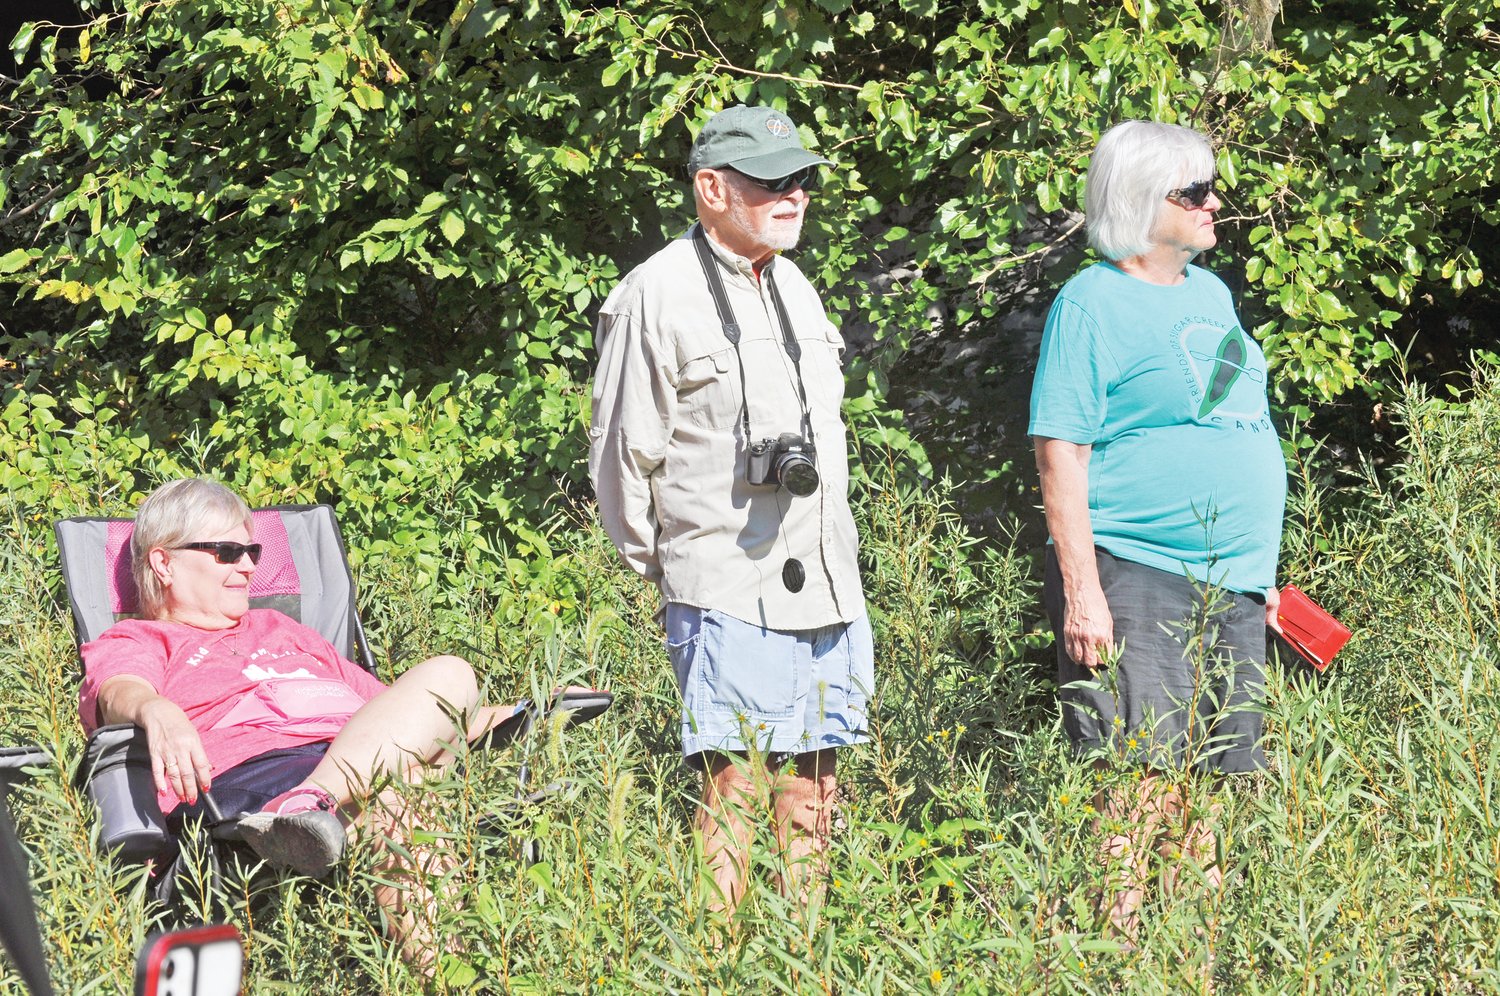 Austin Brooks, center, past president of Friends of Sugar Creek, watches the demolition of the Sugar Creek lowhead dam with FCS member Sue Fain, left, and executive director Cindy Woodall on Tuesday.